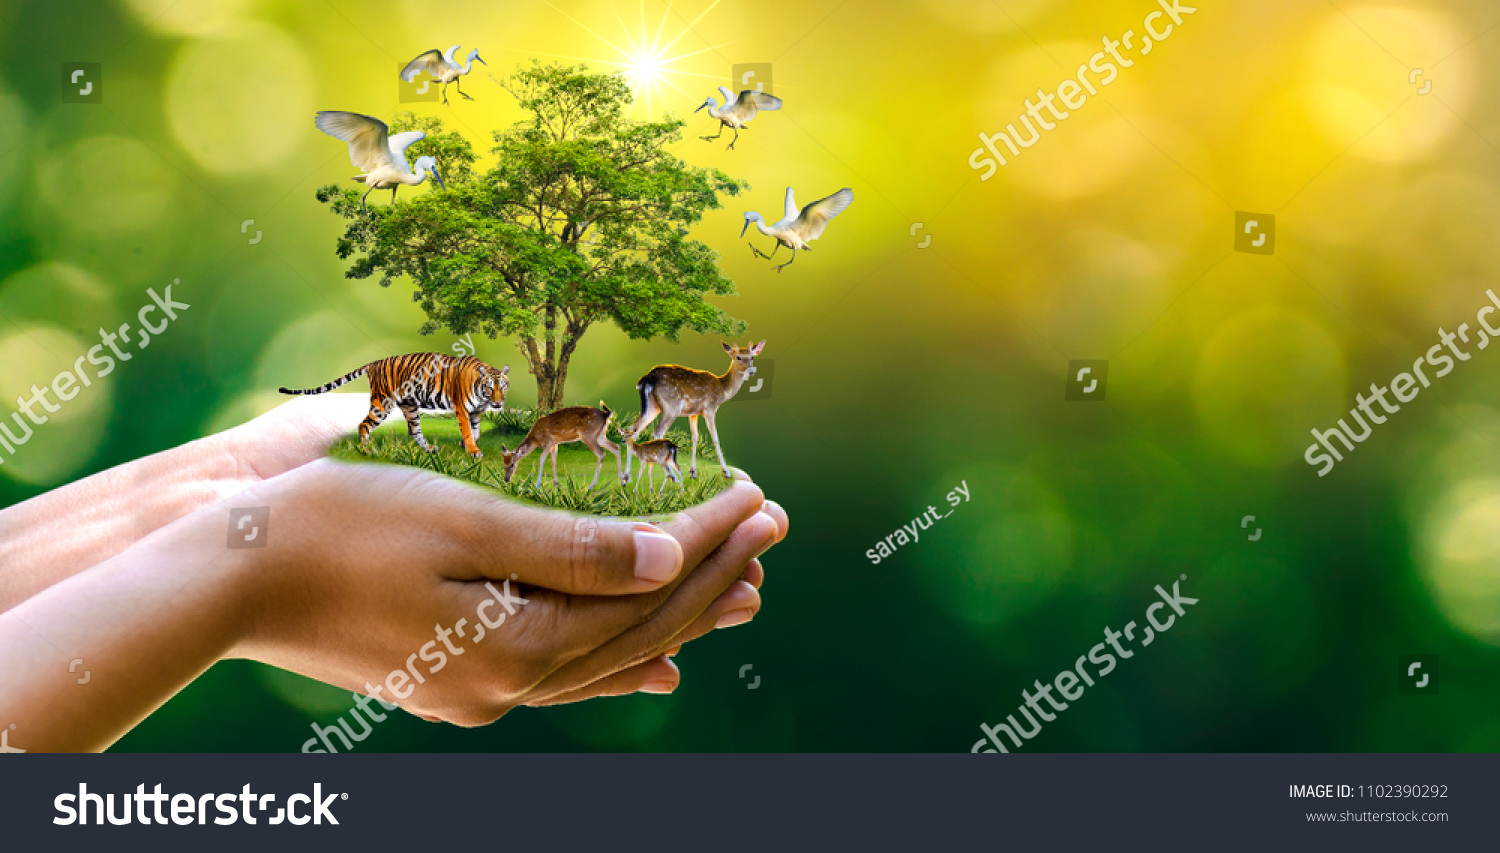 Concept Nature reserve conserve Wildlife reserve tiger Deer Global warming Food Loaf Ecology Human hands protecting the wild and wild animals tigers deer, trees in the hands green background Sun light #1102390292